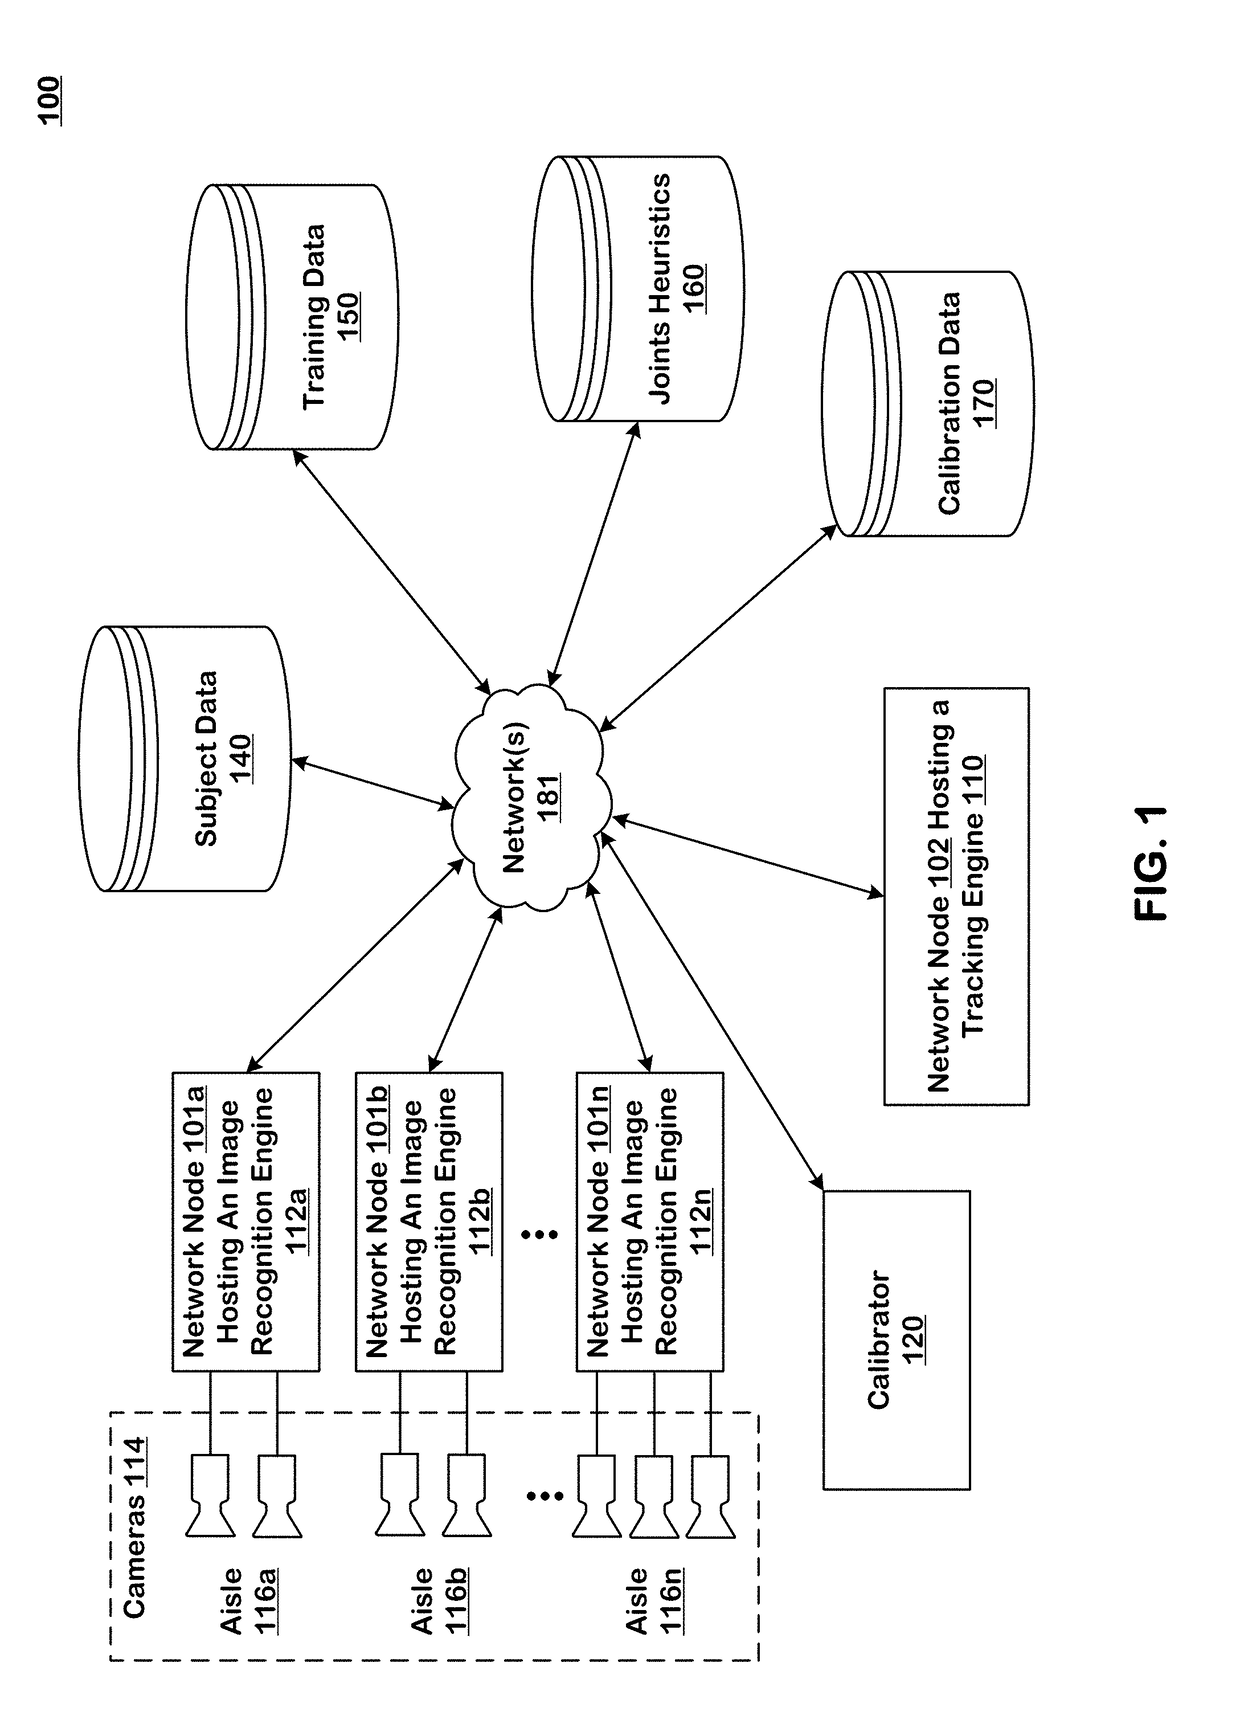 Subject identification and tracking using image recognition